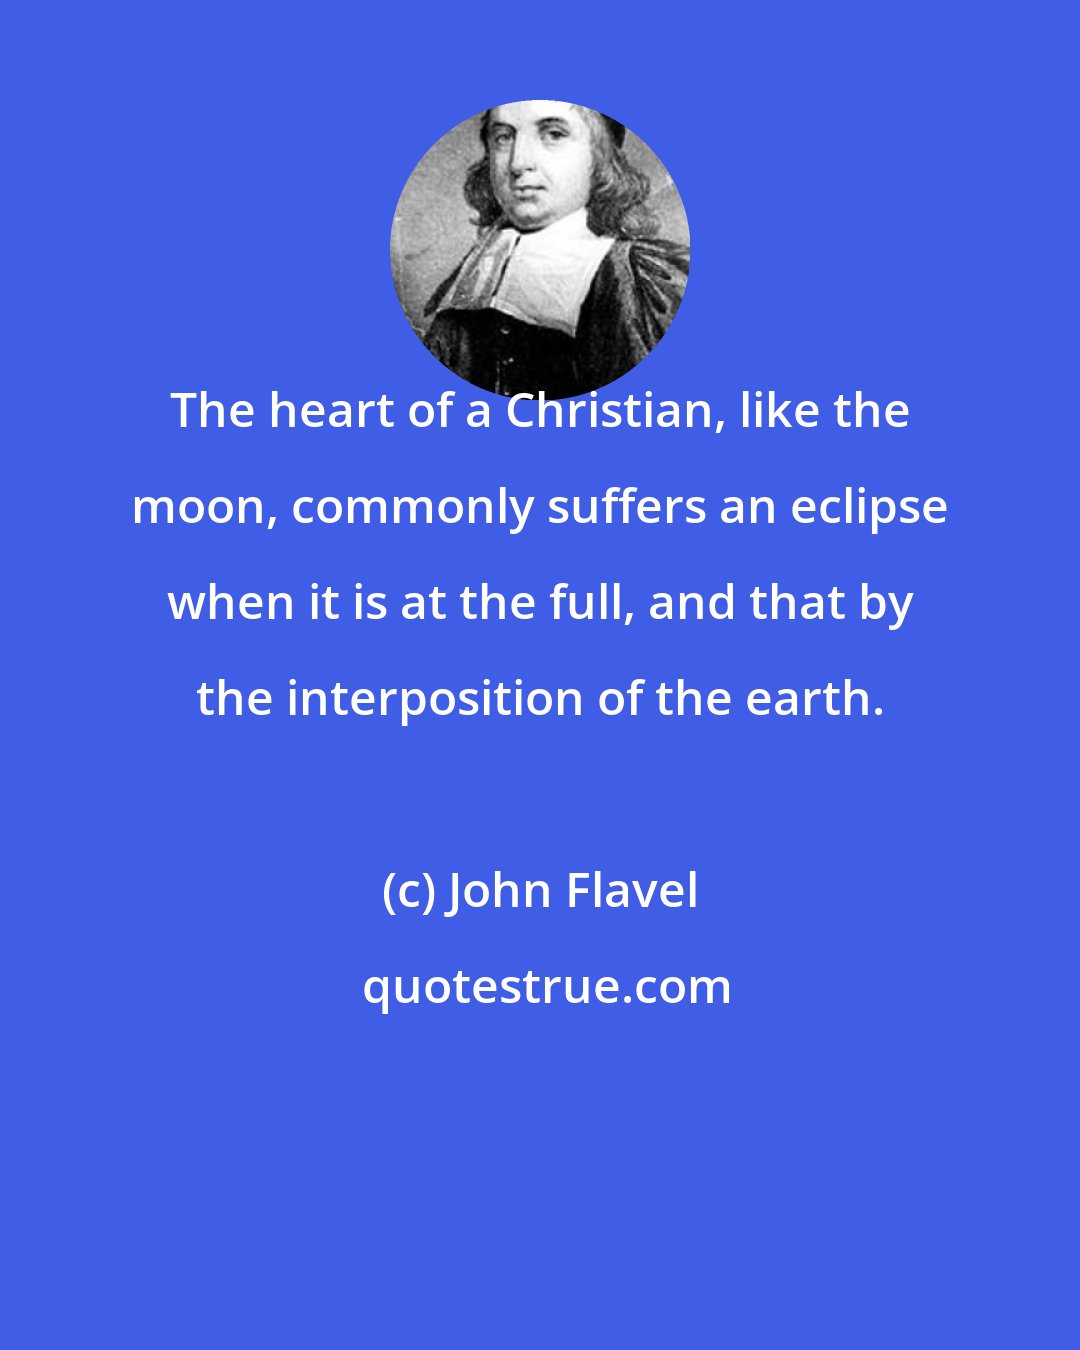 John Flavel: The heart of a Christian, like the moon, commonly suffers an eclipse when it is at the full, and that by the interposition of the earth.